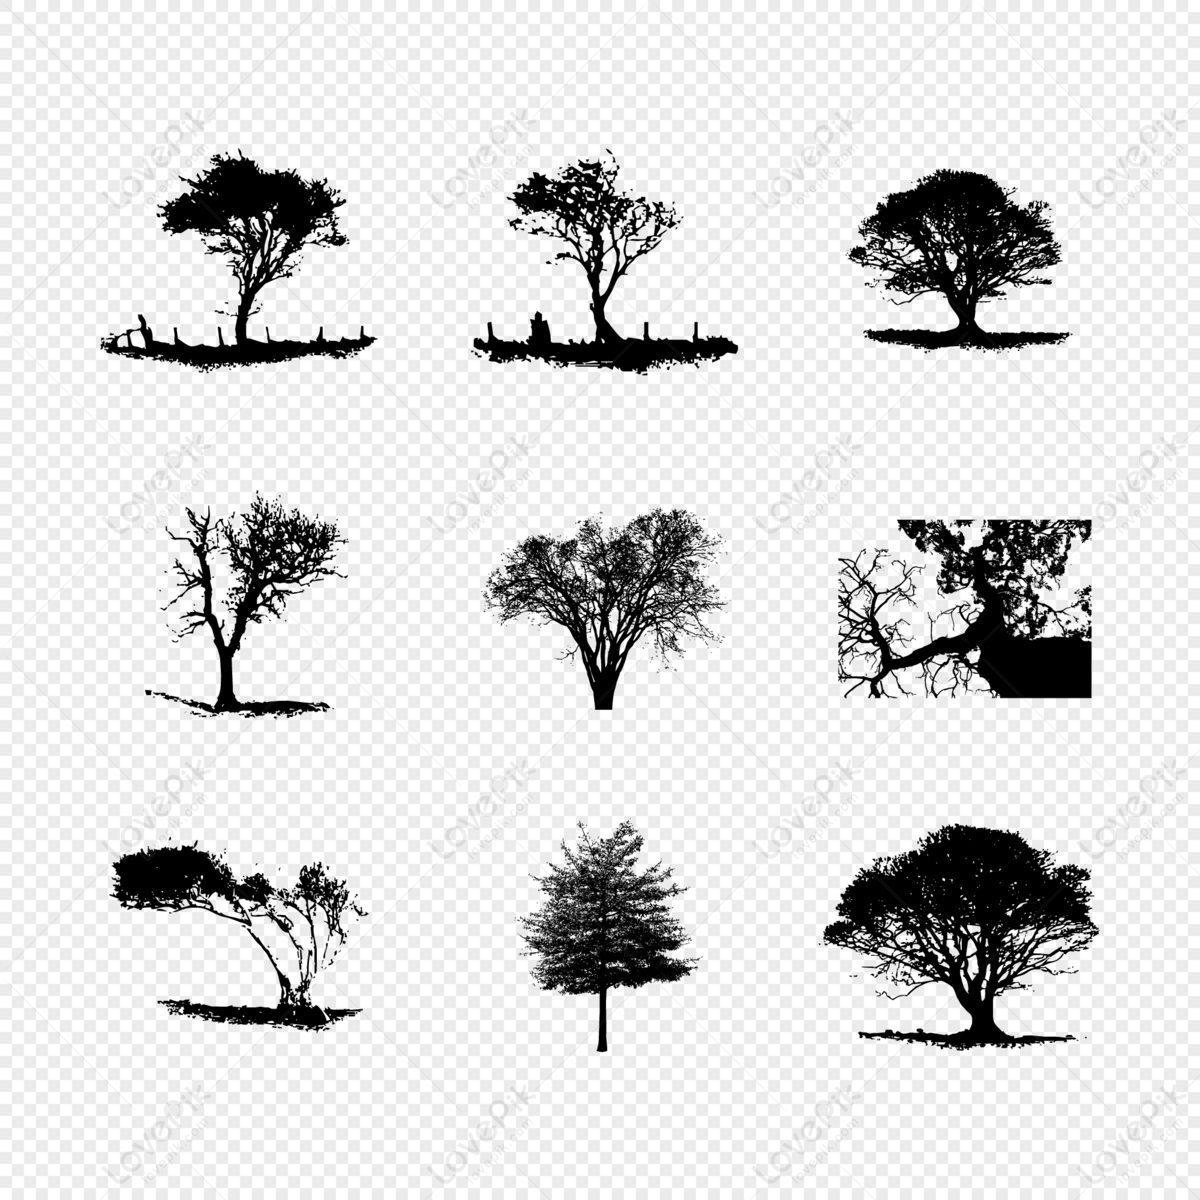 tree silhouette vector, tree, vector silhouette, night tree png image